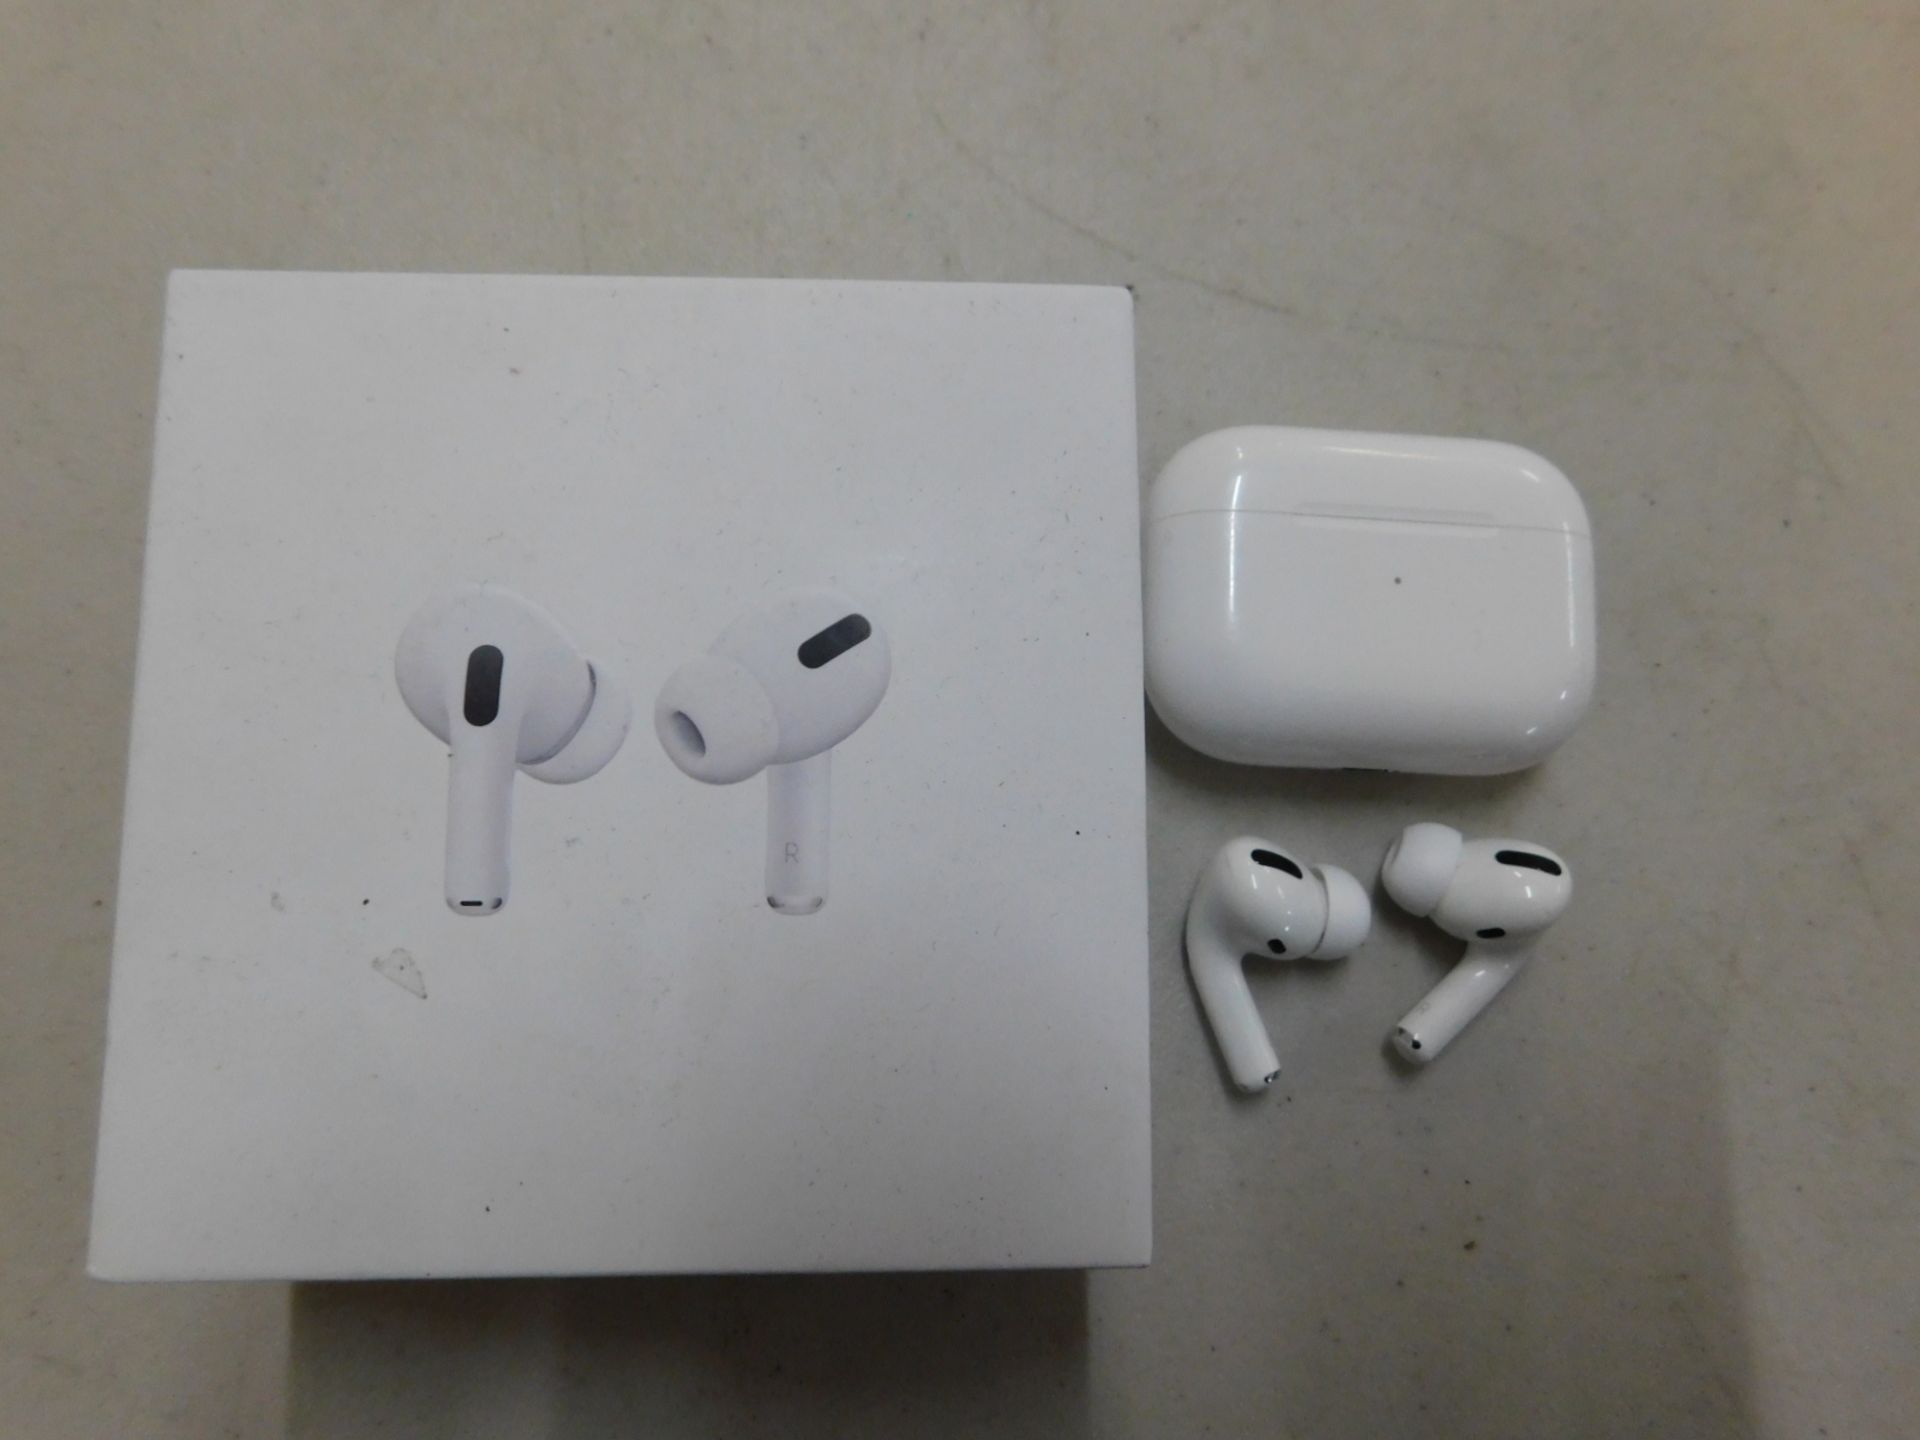 1 BOXED PAIR OF APPLE AIRPODS PRO BLUETOOTH EARPHONES WITH WIRELESS CHARGING CASE RRP Â£239.99